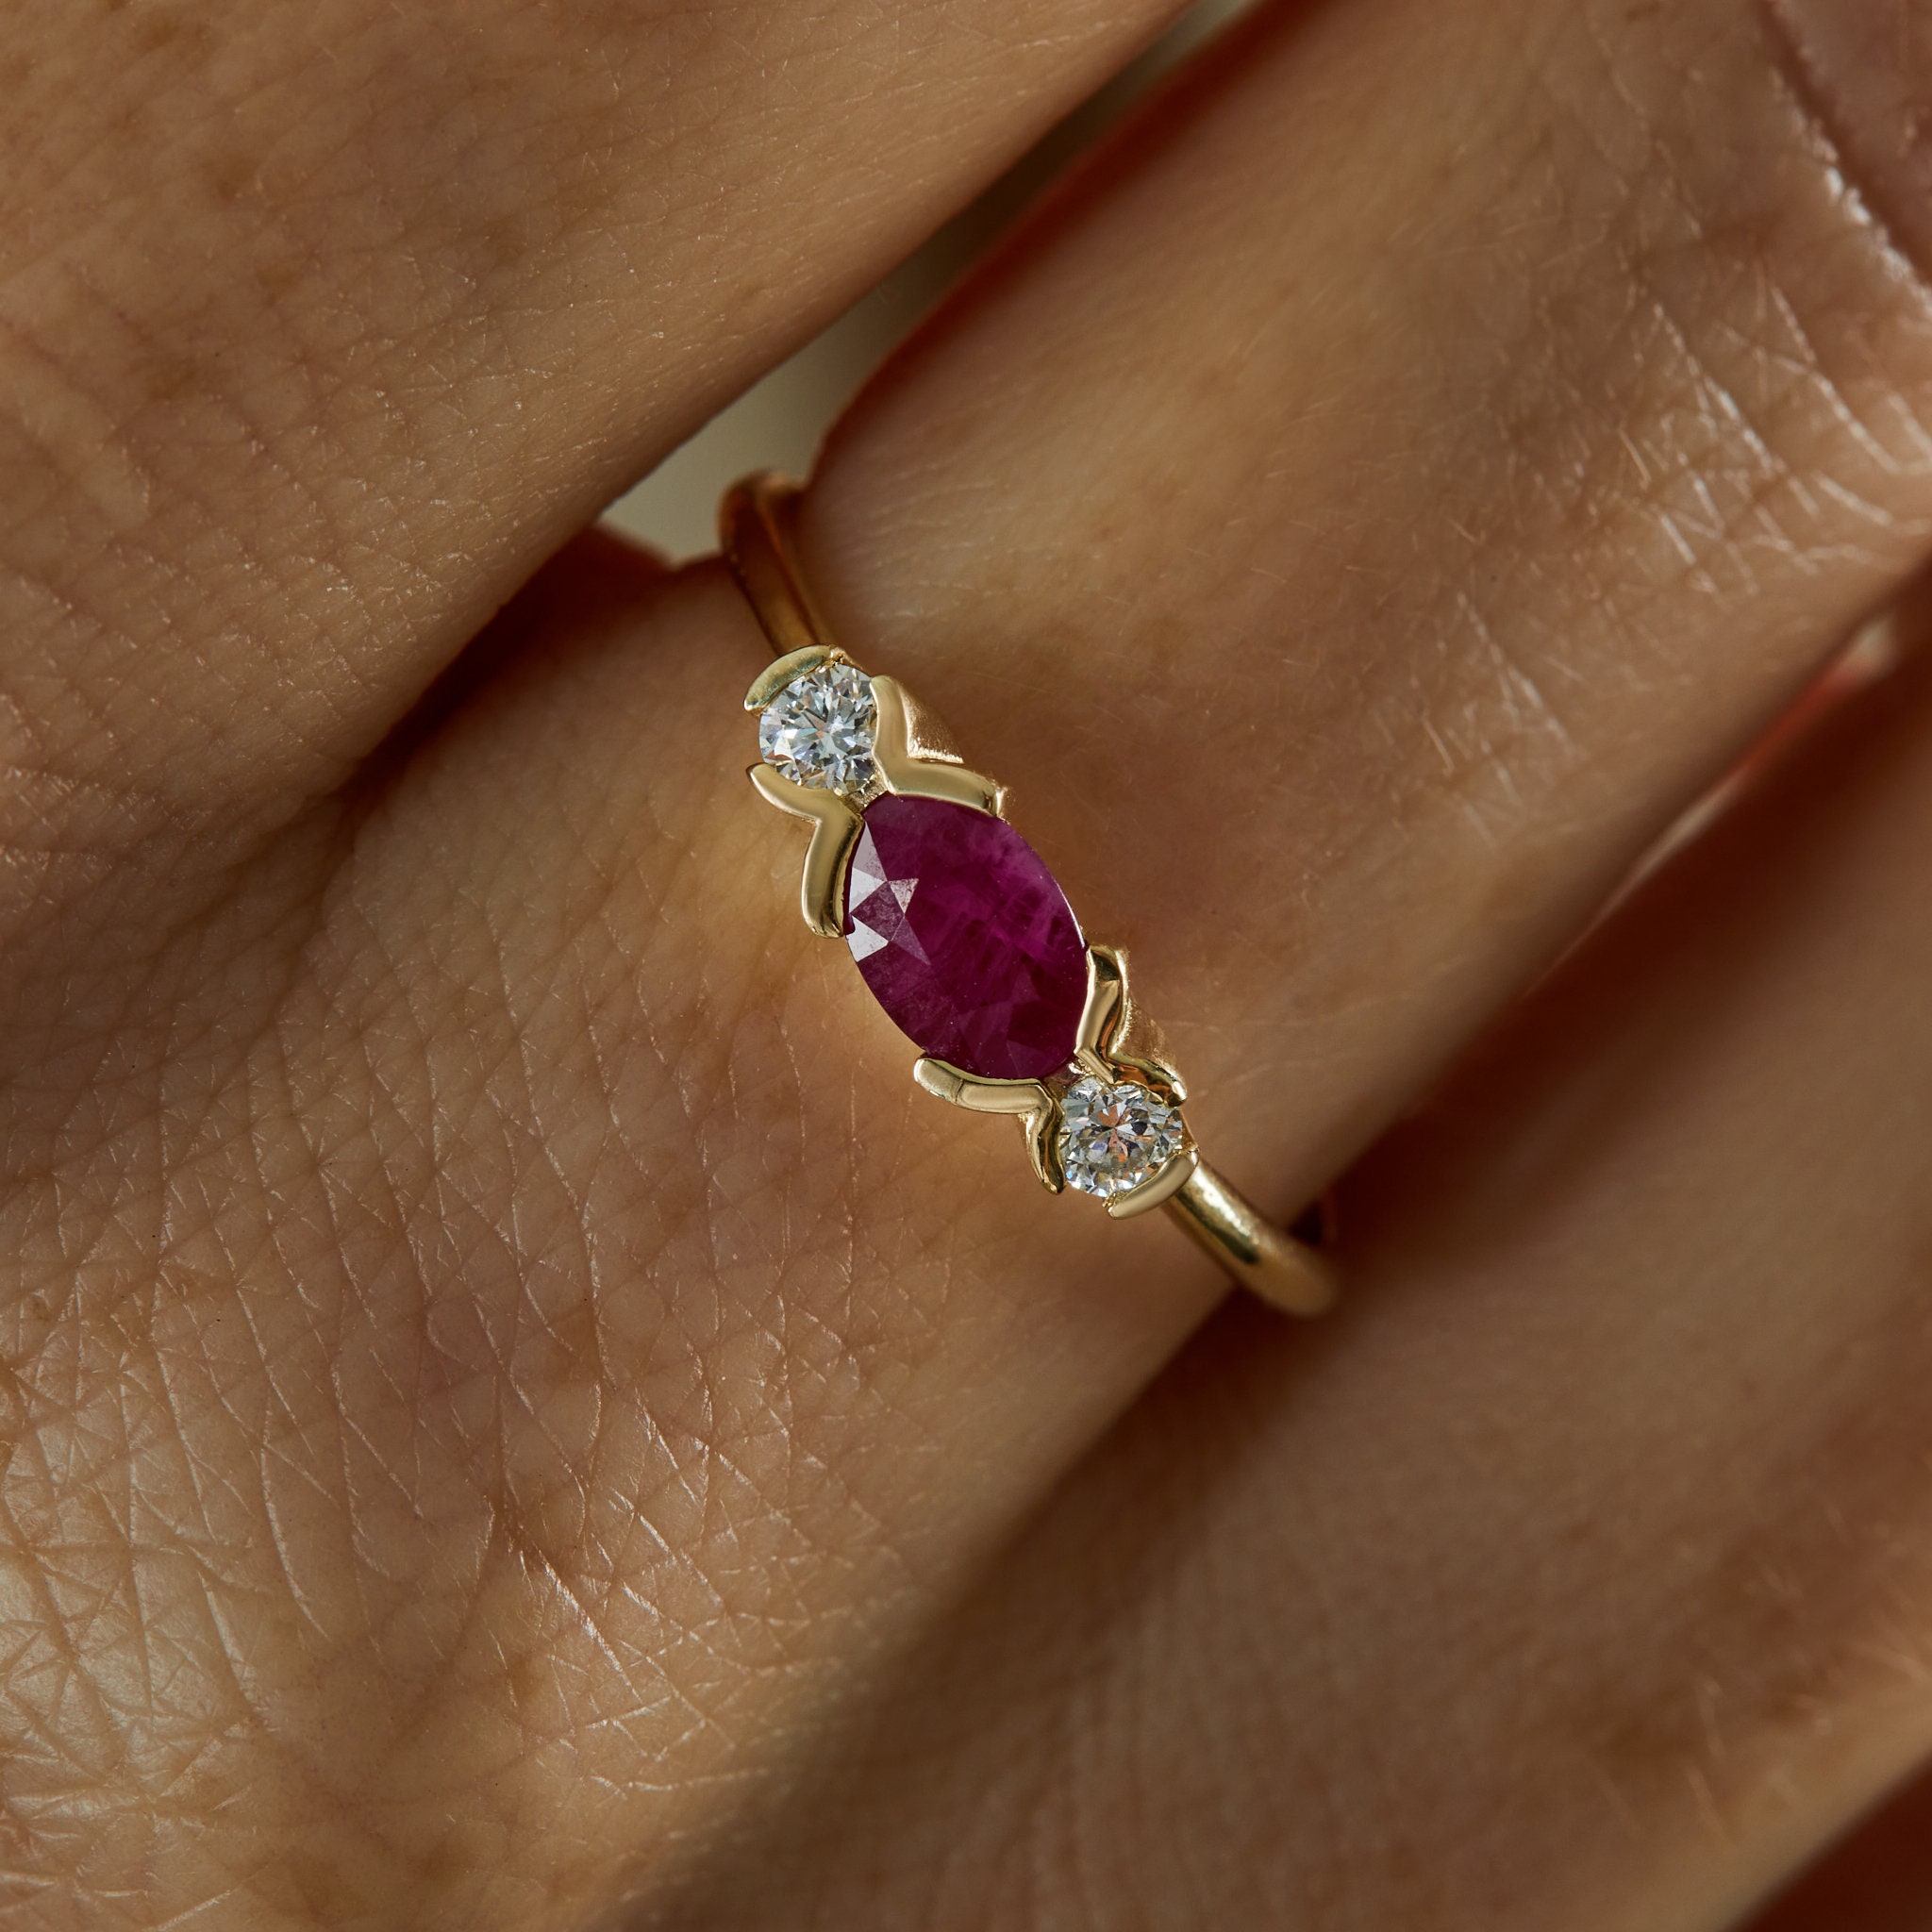 Buy Ruby Ring Gold, Ruby Diamond Ring for Women, Ruby Engagement Ring  Online in India - Etsy